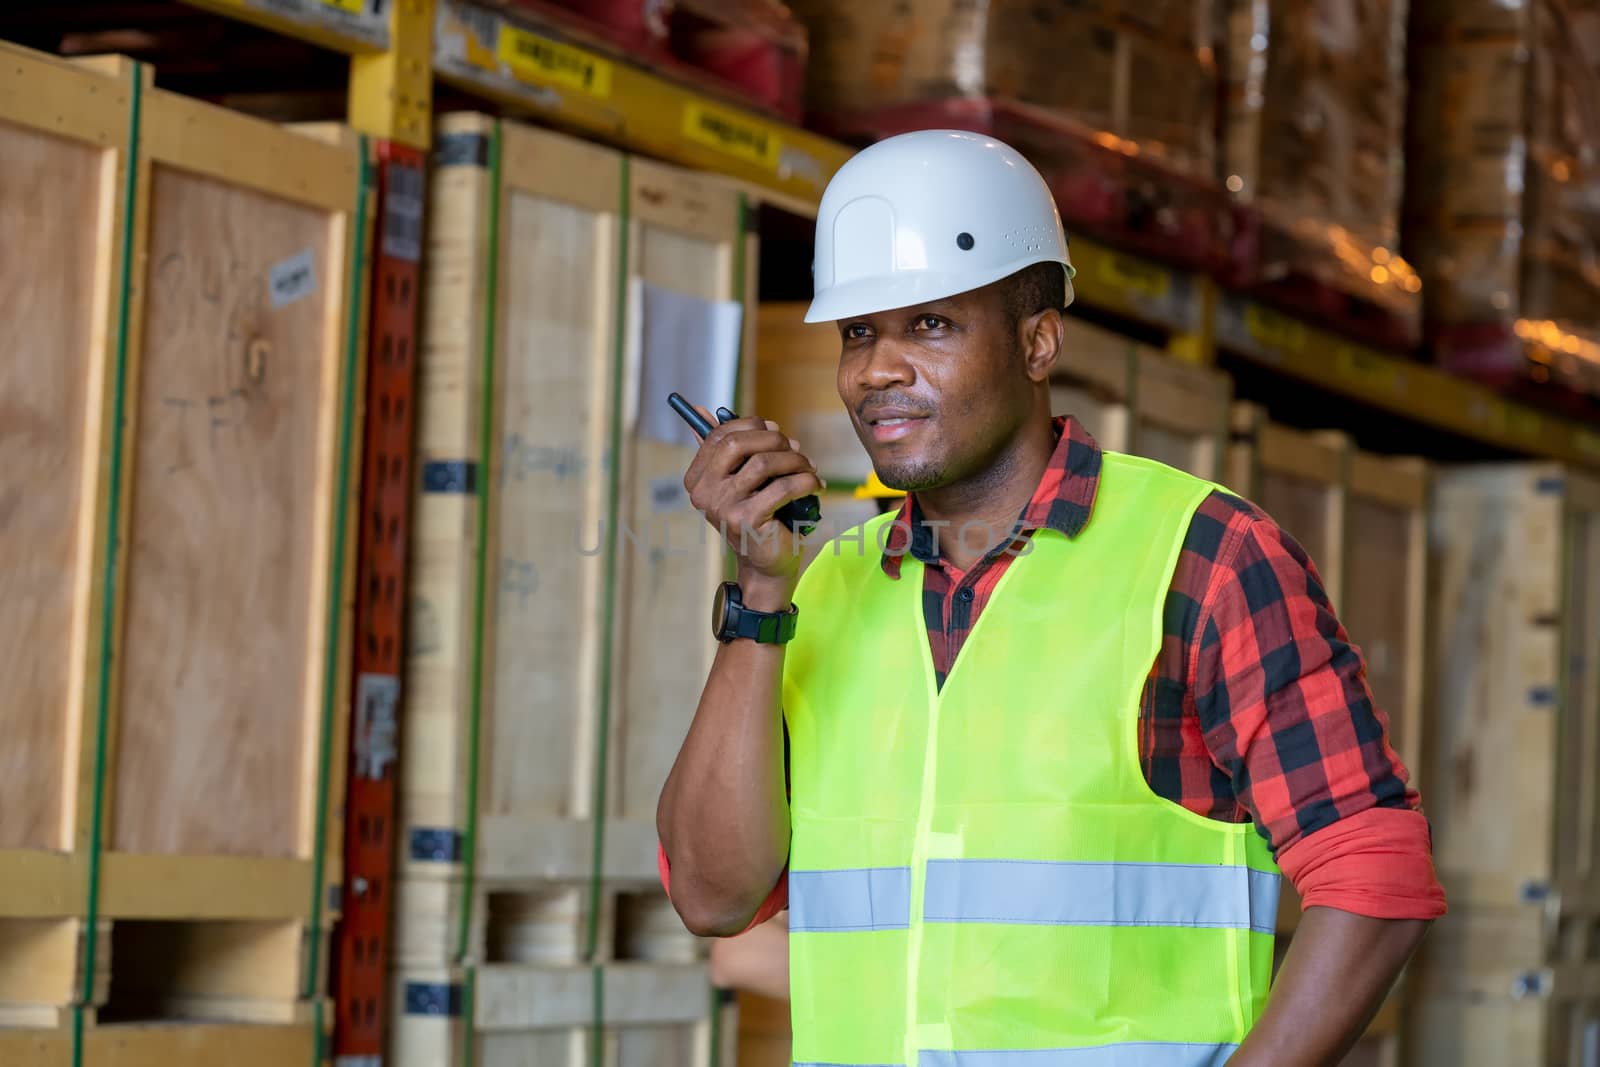 Warehouse worker using handheld radio receiver for communication in a large warehouse.